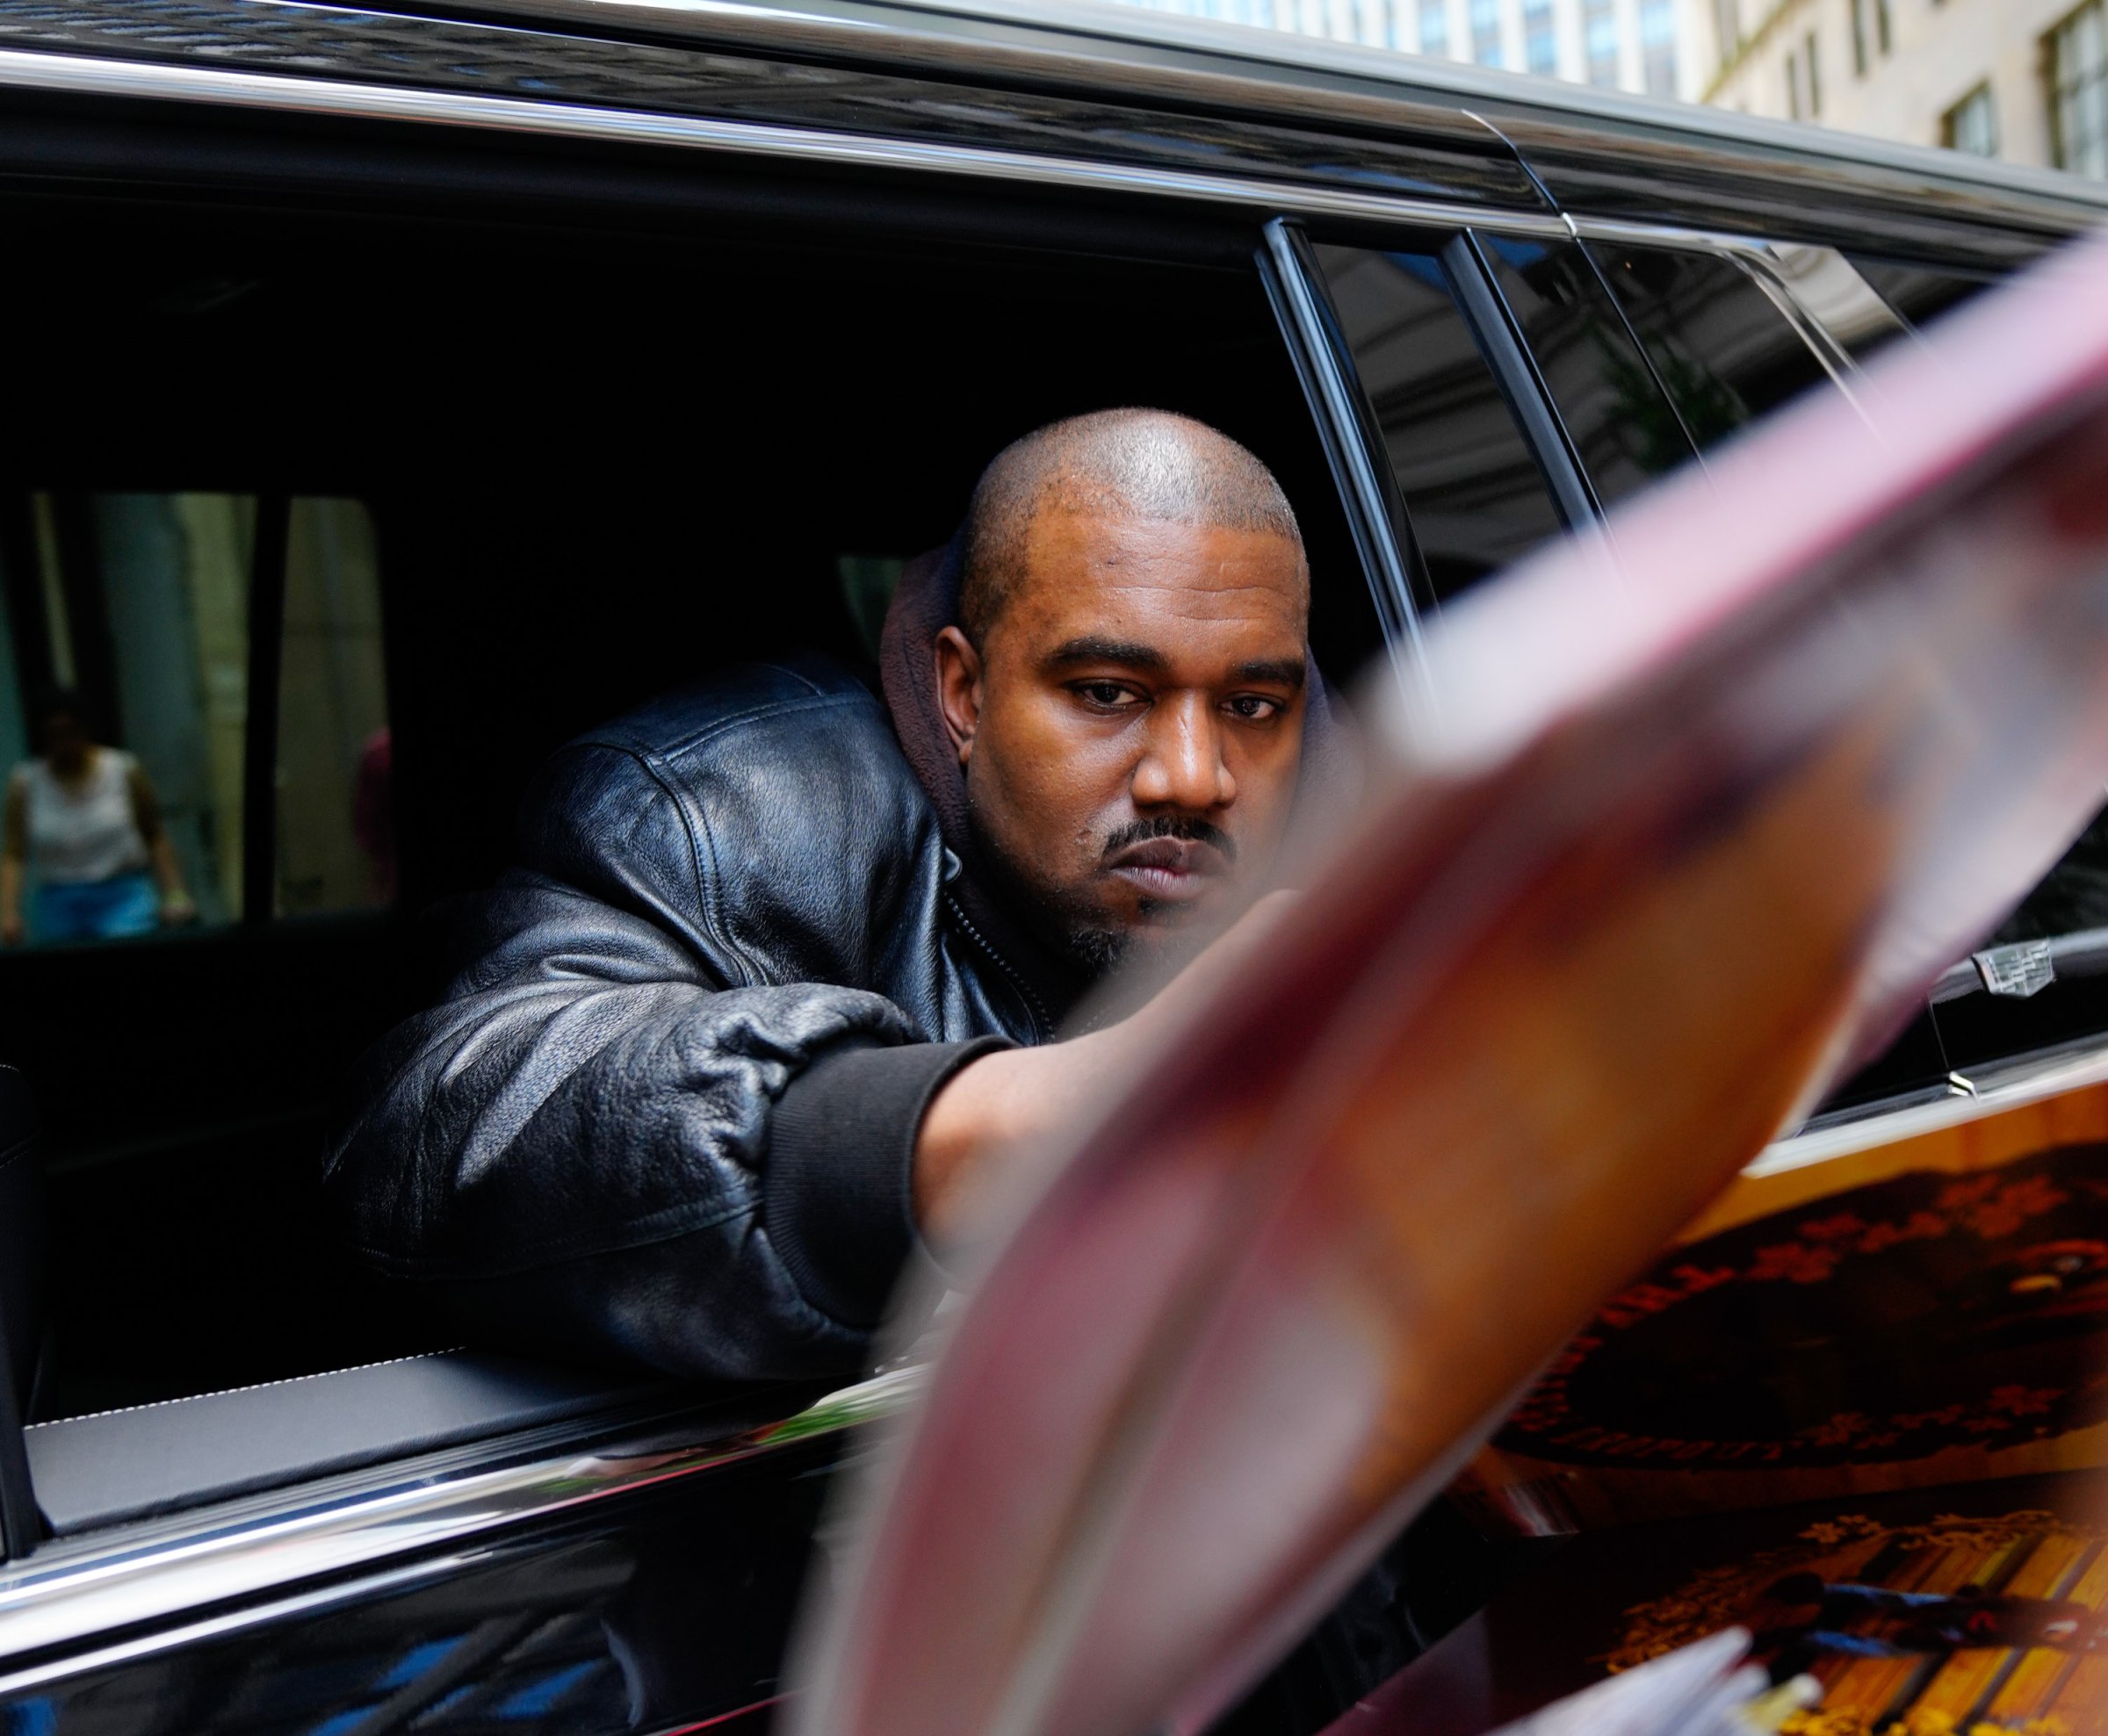 Kanye West signing albums out of a car window